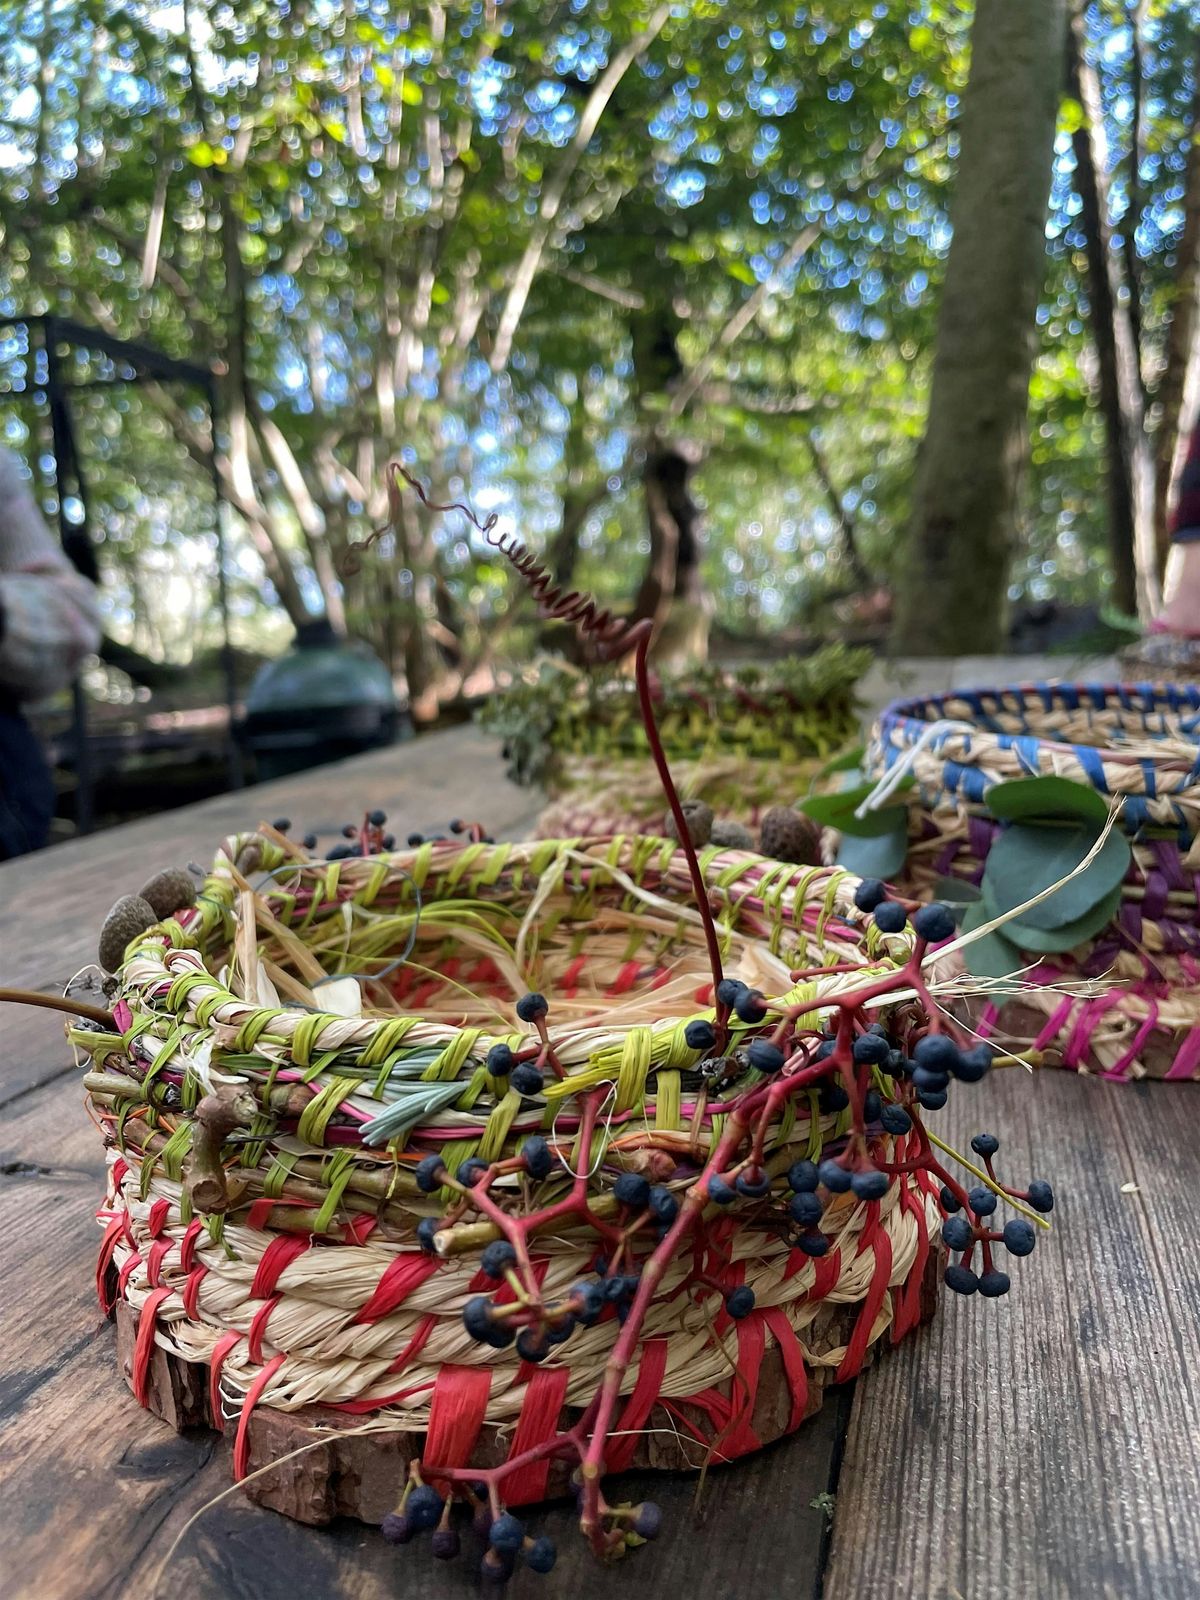 Weaving and Coiling  Baskets- Windsor Great Park - Sunday 8 September